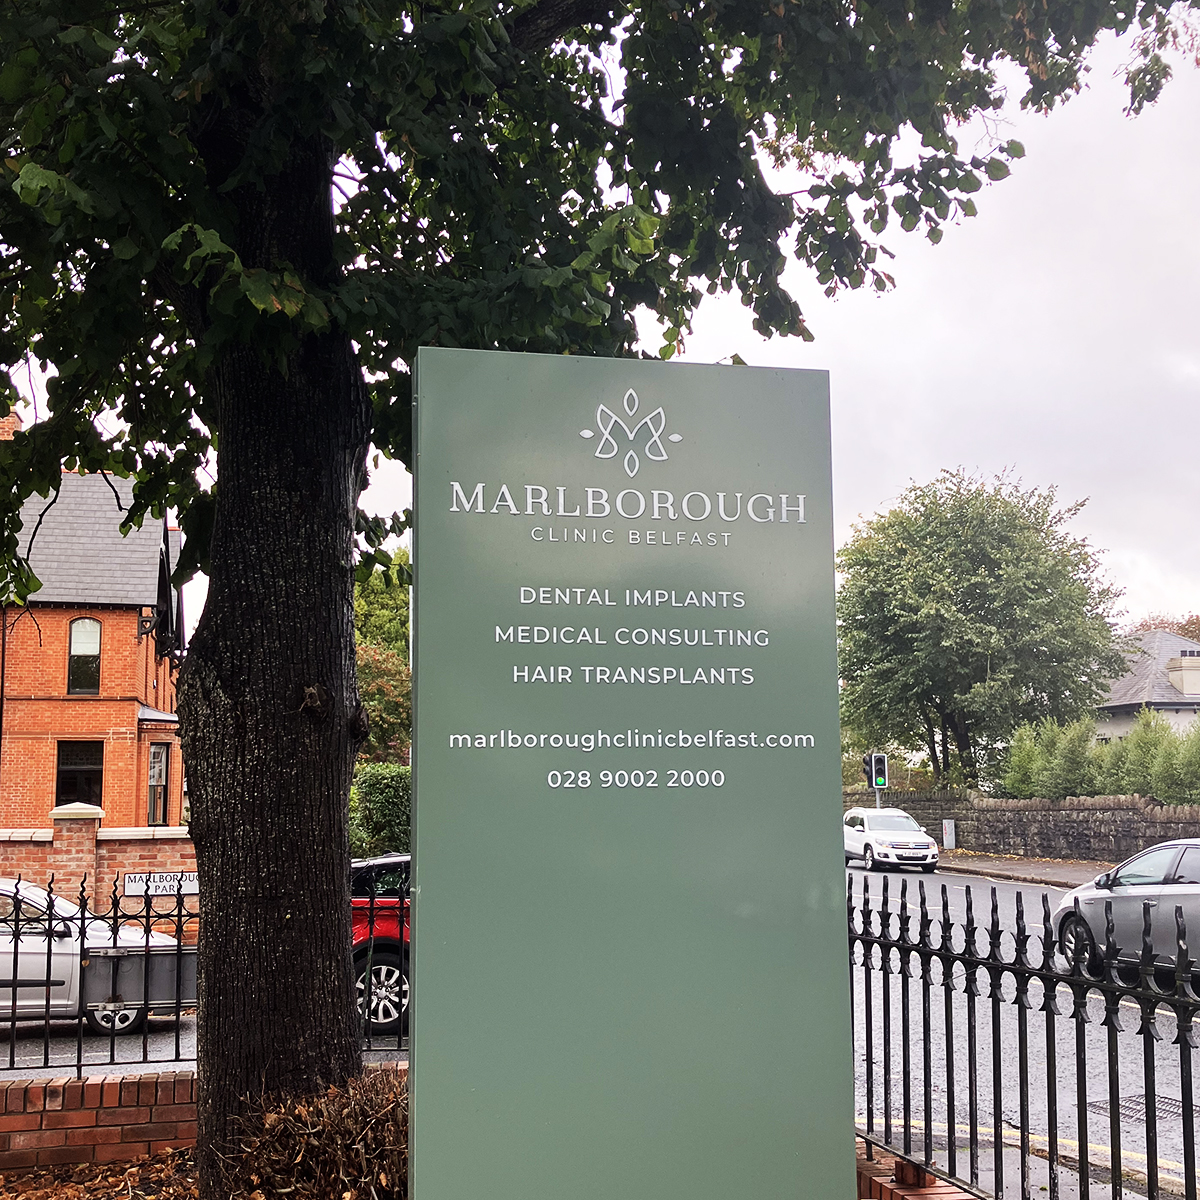 Green monolith sign with practice logo, services and contact details at Marlborough Clinic Belfast